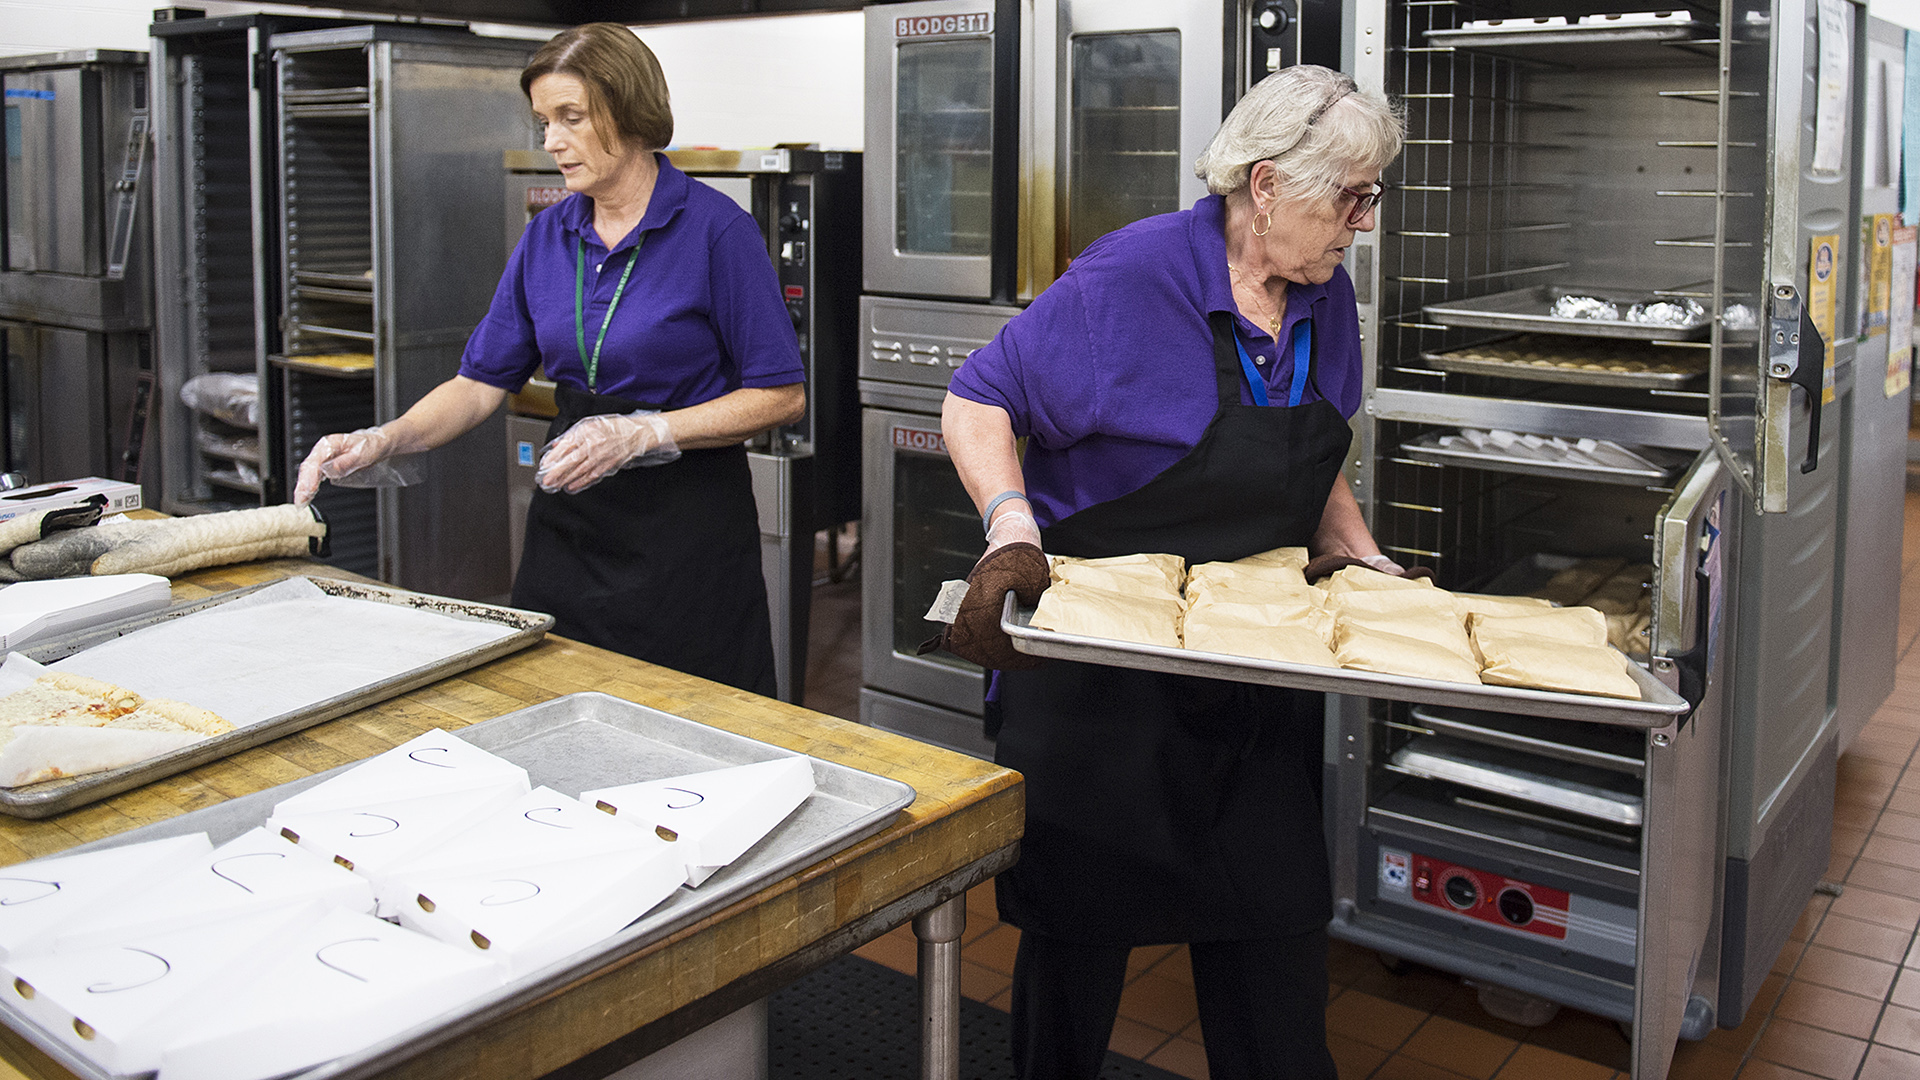 Two people wearing matching shirts and aprons work in a commercial kitchen, with one facing a large table with a butcher's block surface that is covered with large backing trays, and another placing one tray filled with food items wrapped in paper into an adjacent heating appliance, with other institutional food service equipment in the background.